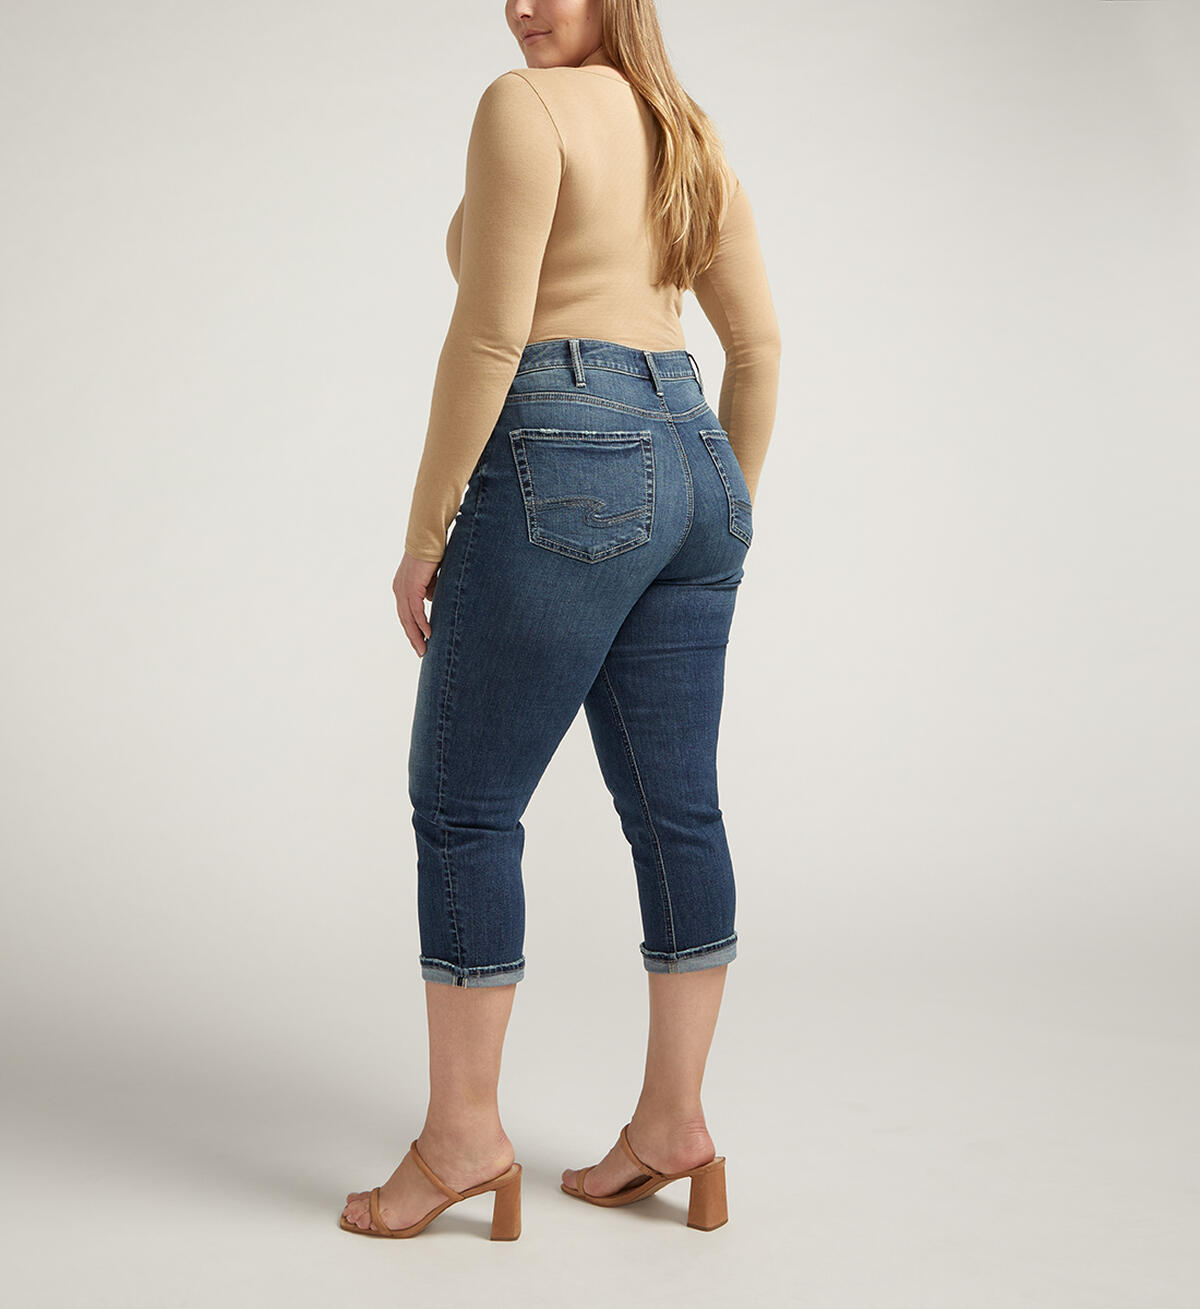 Avery High Rise Capris Plus Size, , hi-res image number 1